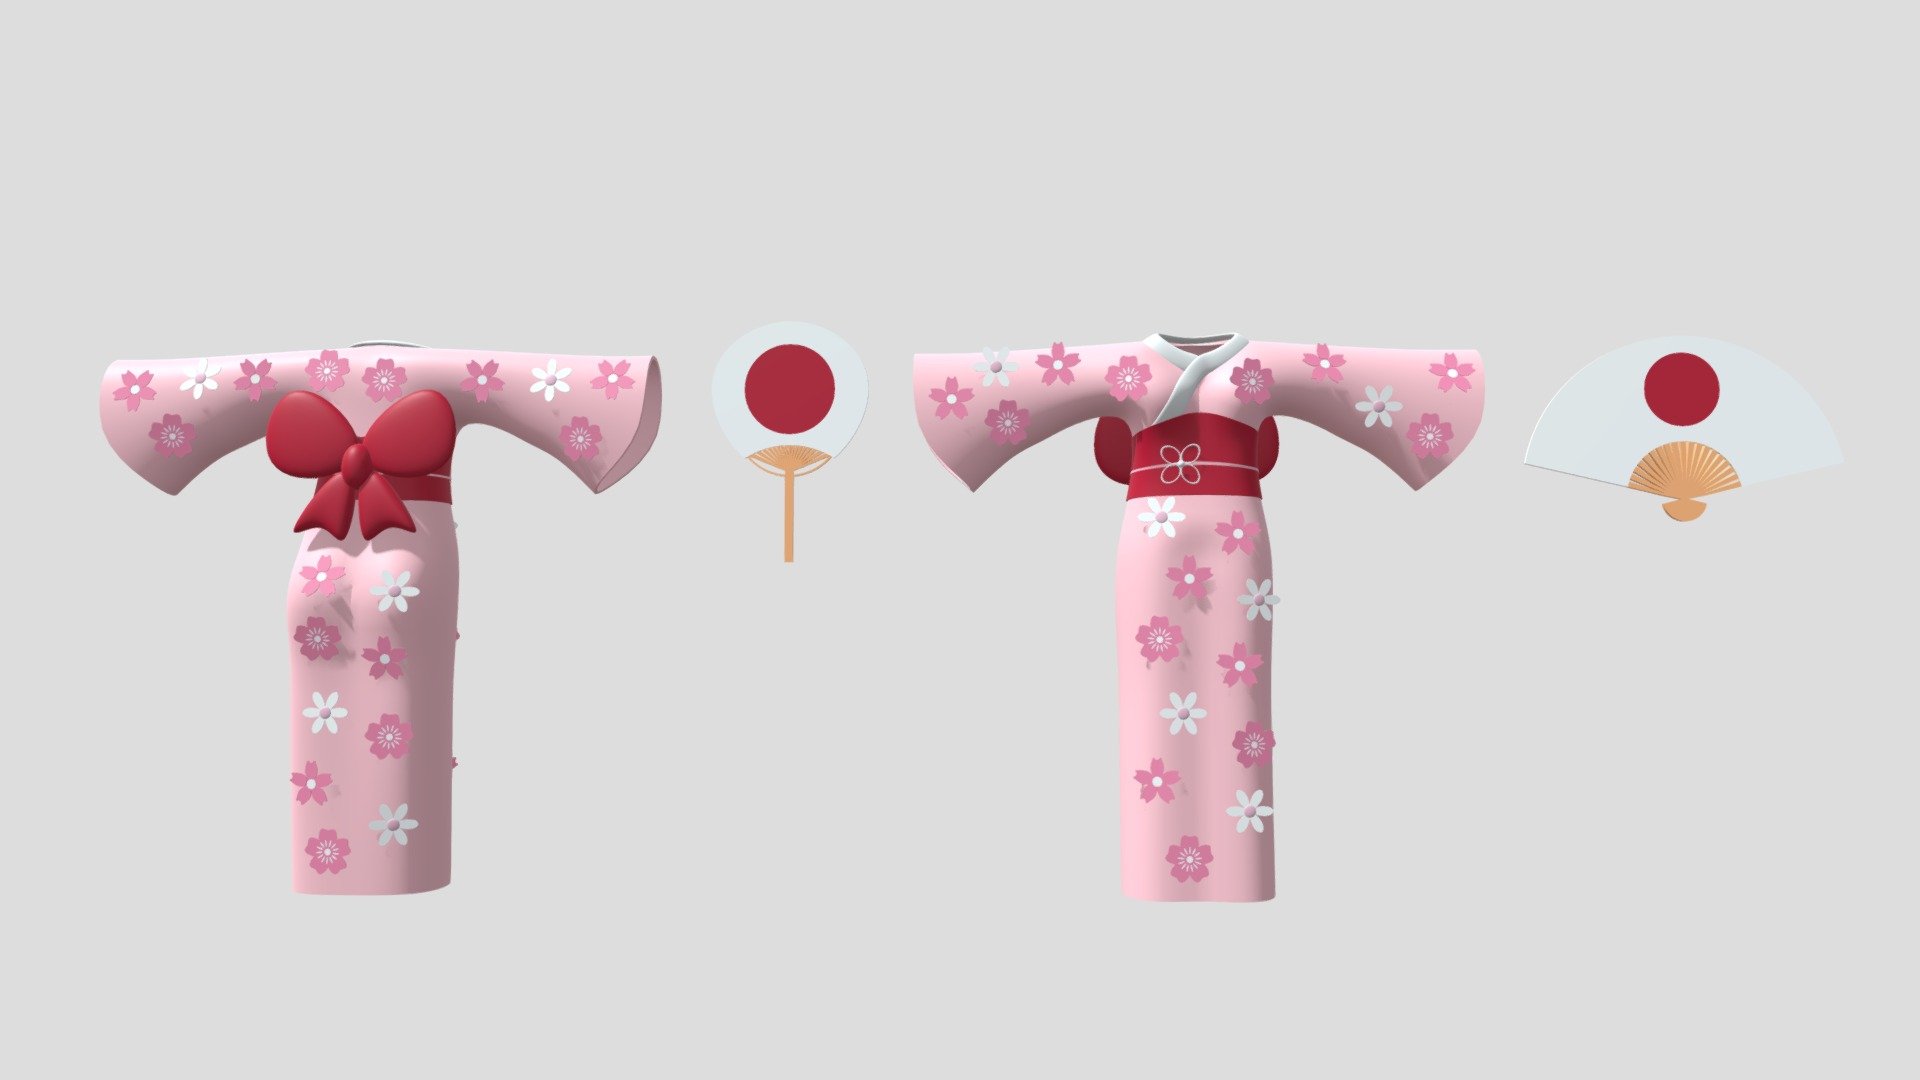 -Cartoon Lovely Japanese Kimono With Hand Fan.

-This project contains 92 objects.

-Subdivision 2 : Verts : 82,220 , Faces : 58,842.

-Subdivision 1 : Verts : 66,464 , Faces : 45,816.

-Materials have the correct names.

-This product was created in Blender 2.8.

-Formats: blend, fbx, obj, c4d, dae, abc, stl, glb,unitypackage.

-We hope you enjoy this model.

-Thank you 3d model